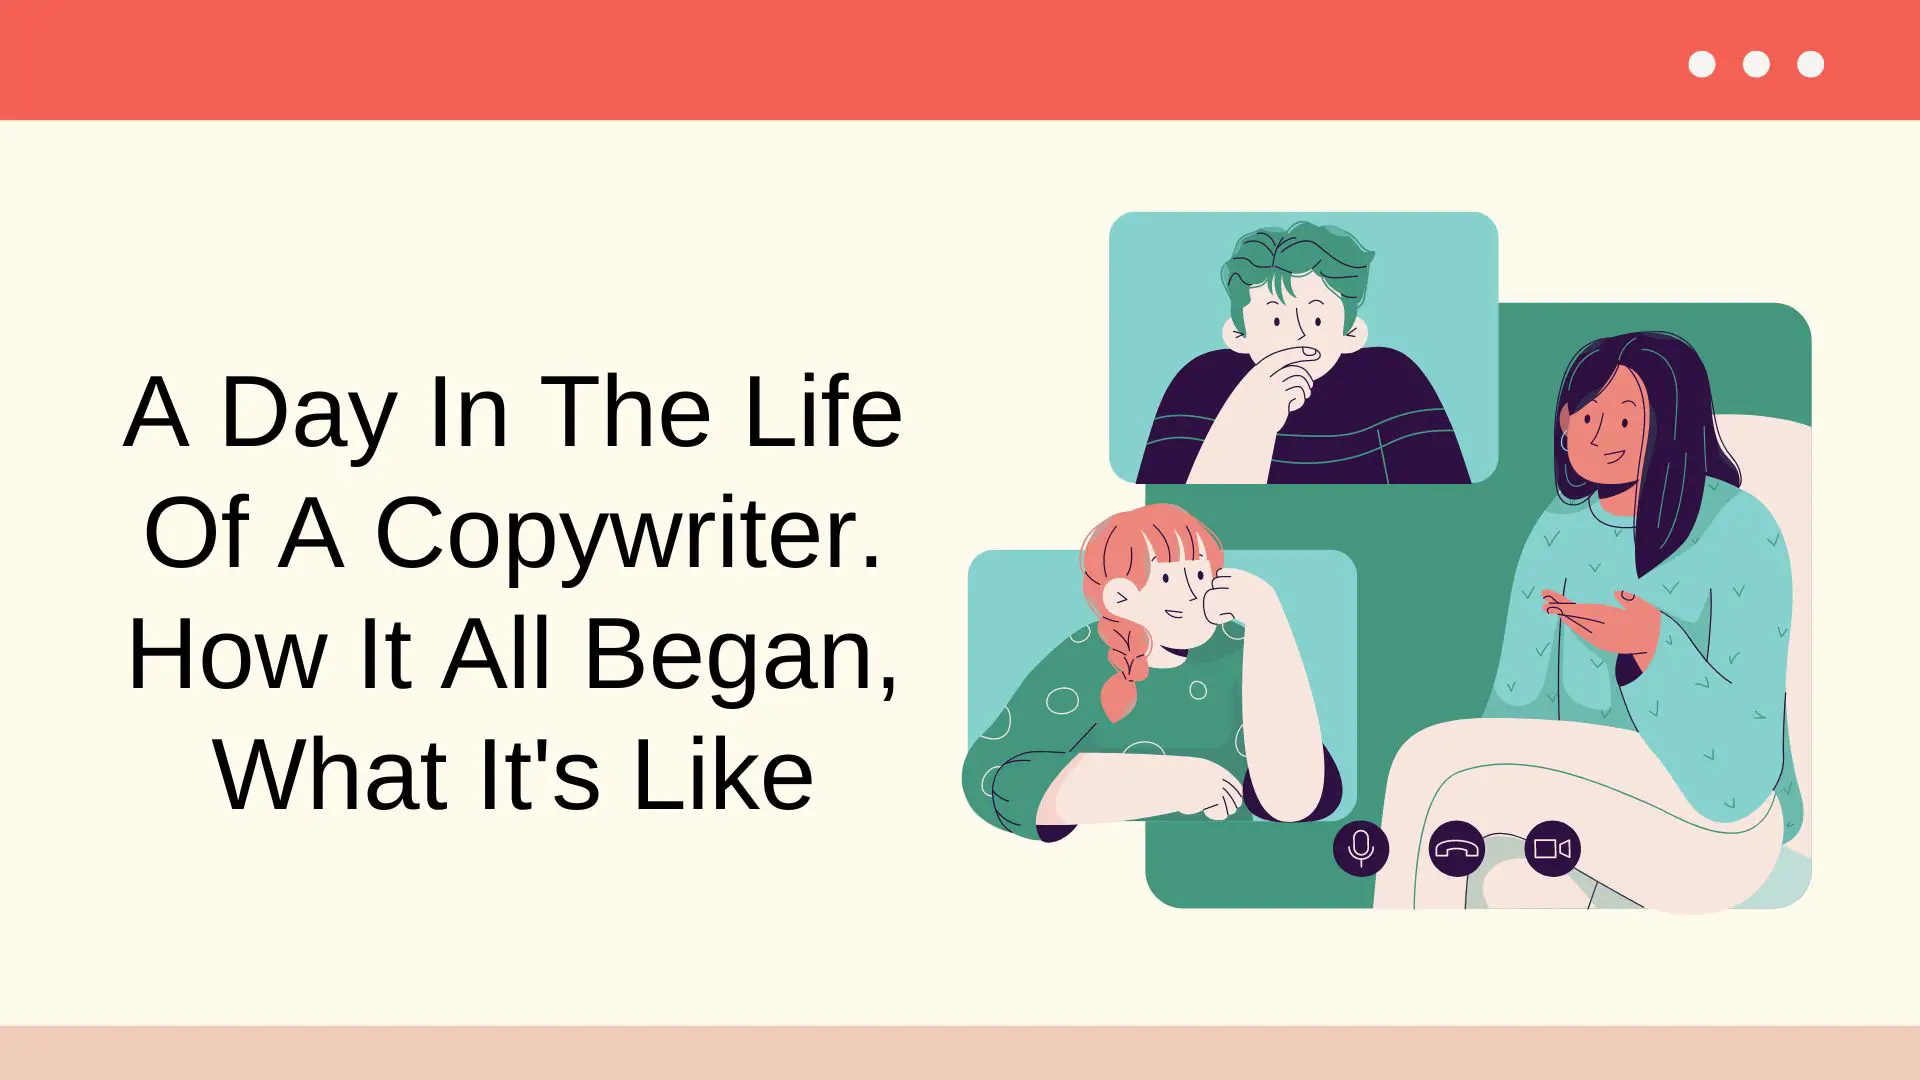 A Day In The Life Of A Copywriter. How It All Began, What It's Like